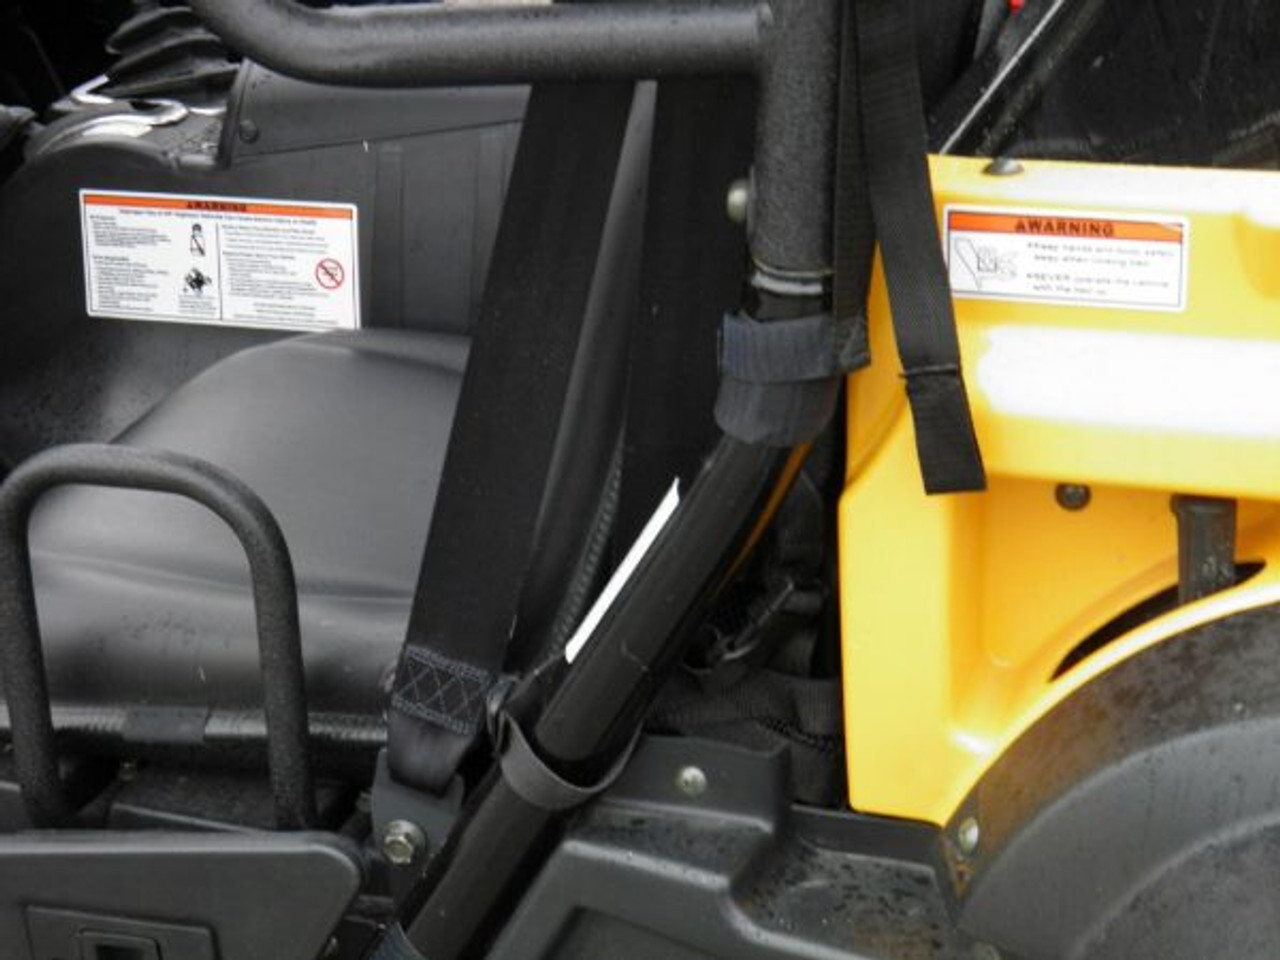 3 Star side x side Cub Cadet Challenger 500/700 soft top close-up view